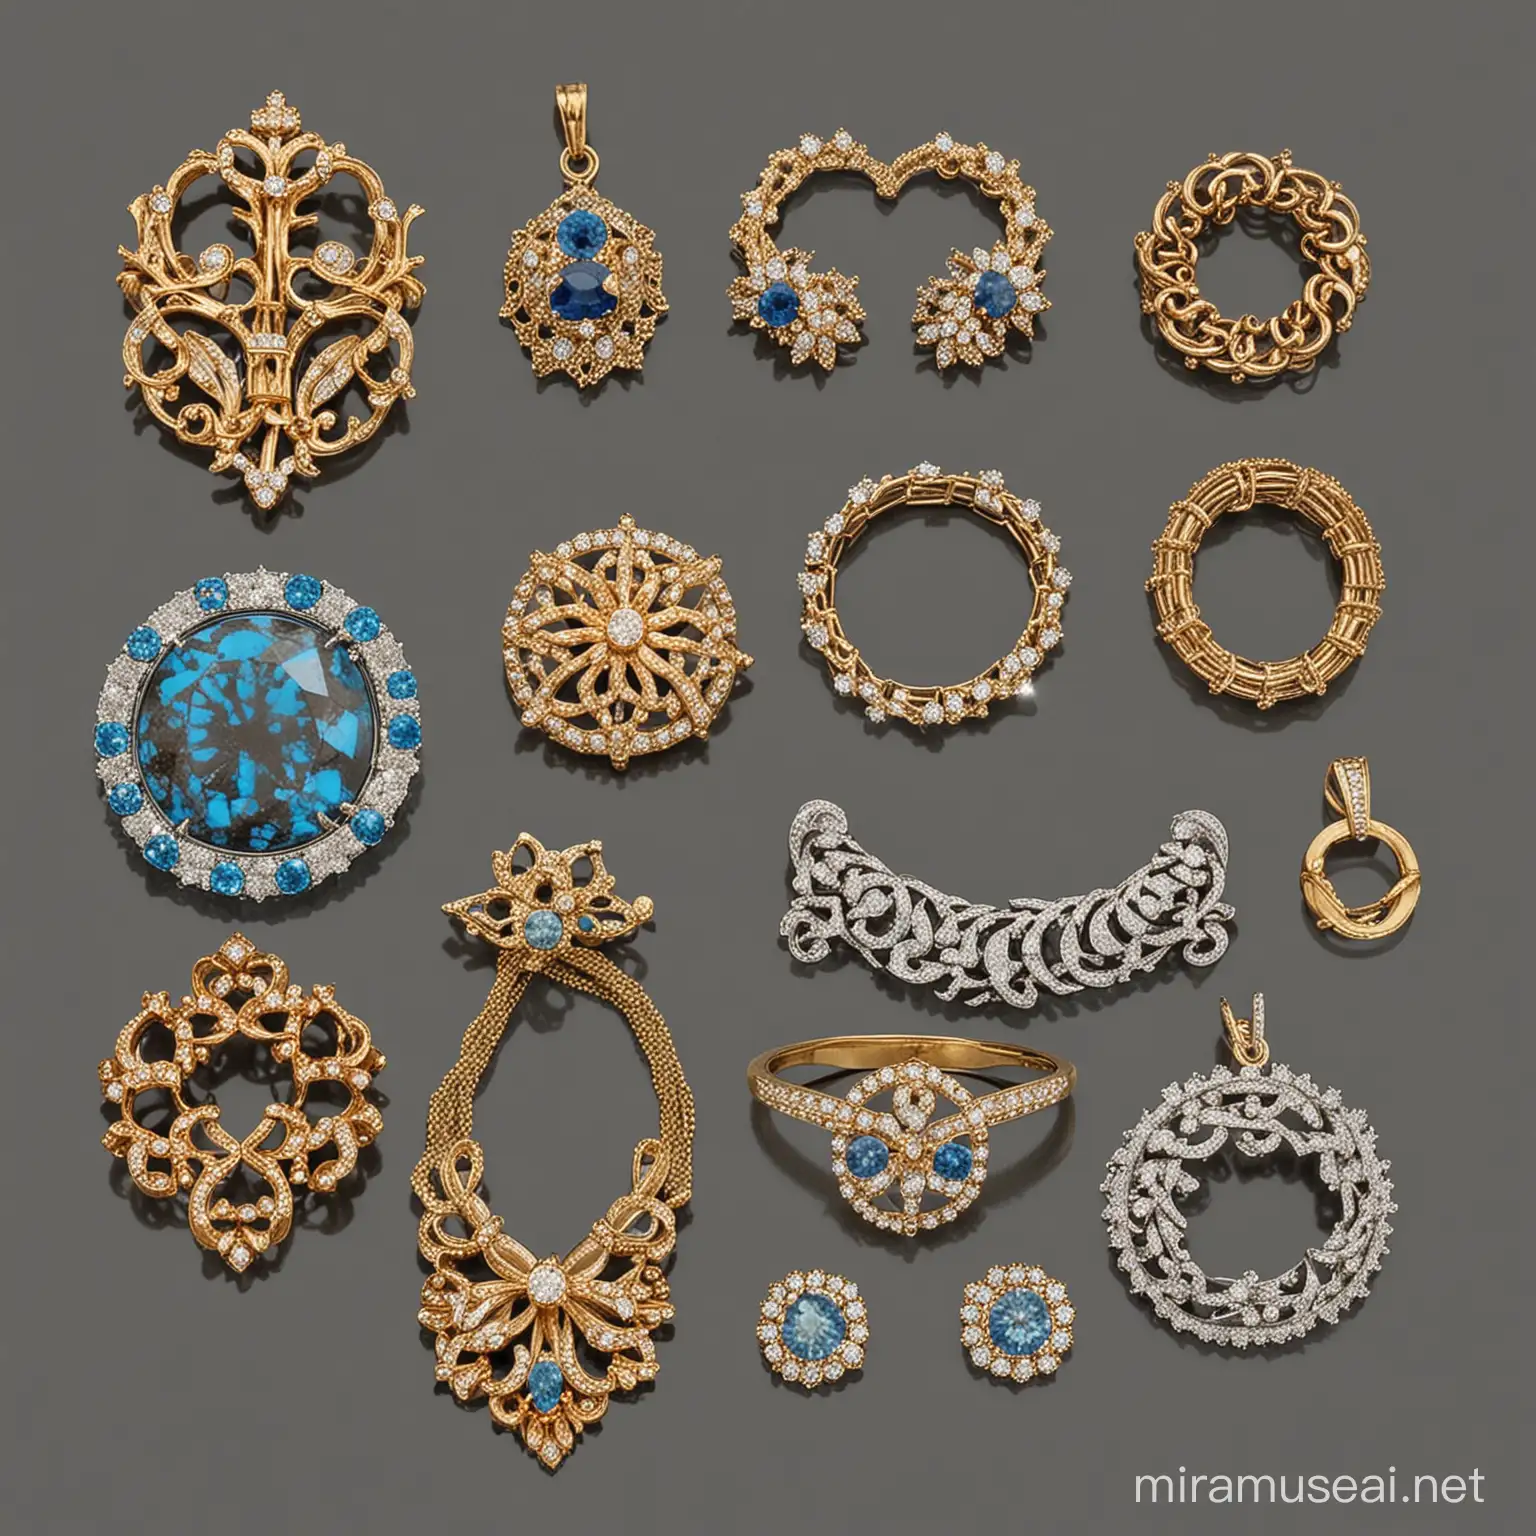 A collection of jewelry